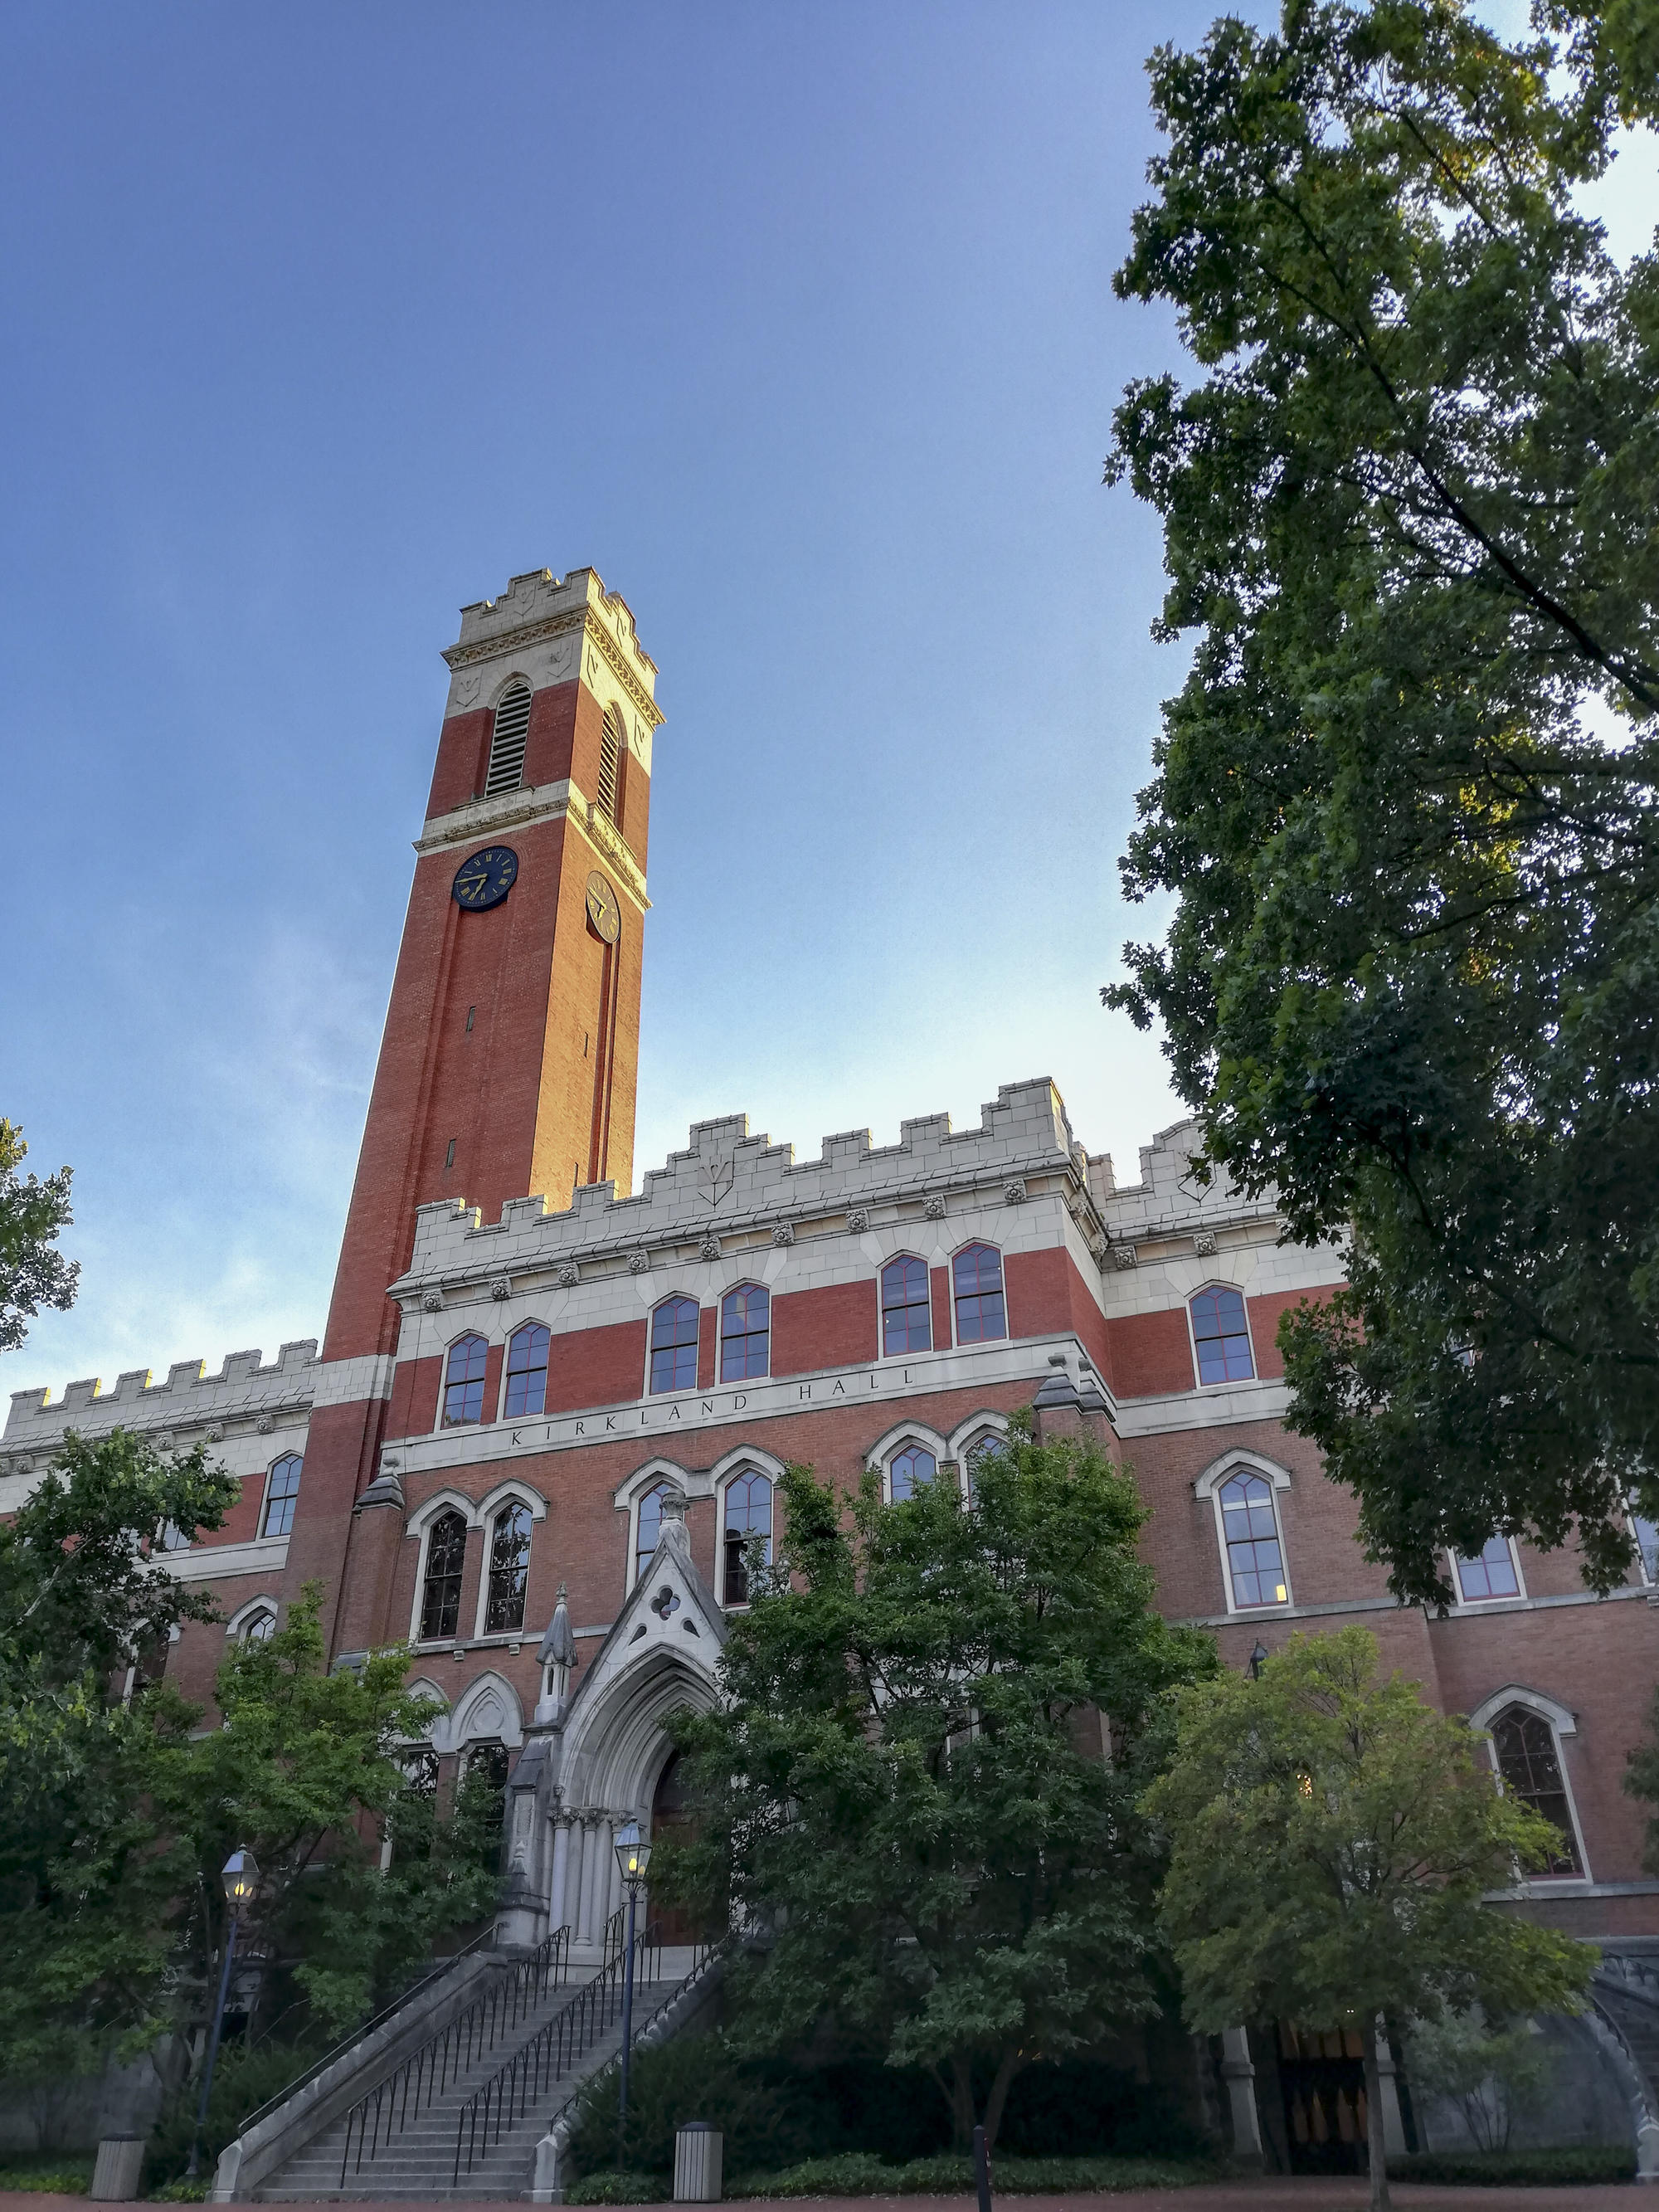 A Vanderbilt University landmark, Kirkland Hall was built in 1875. Its clock tower can be seen from all over the university’s campus.